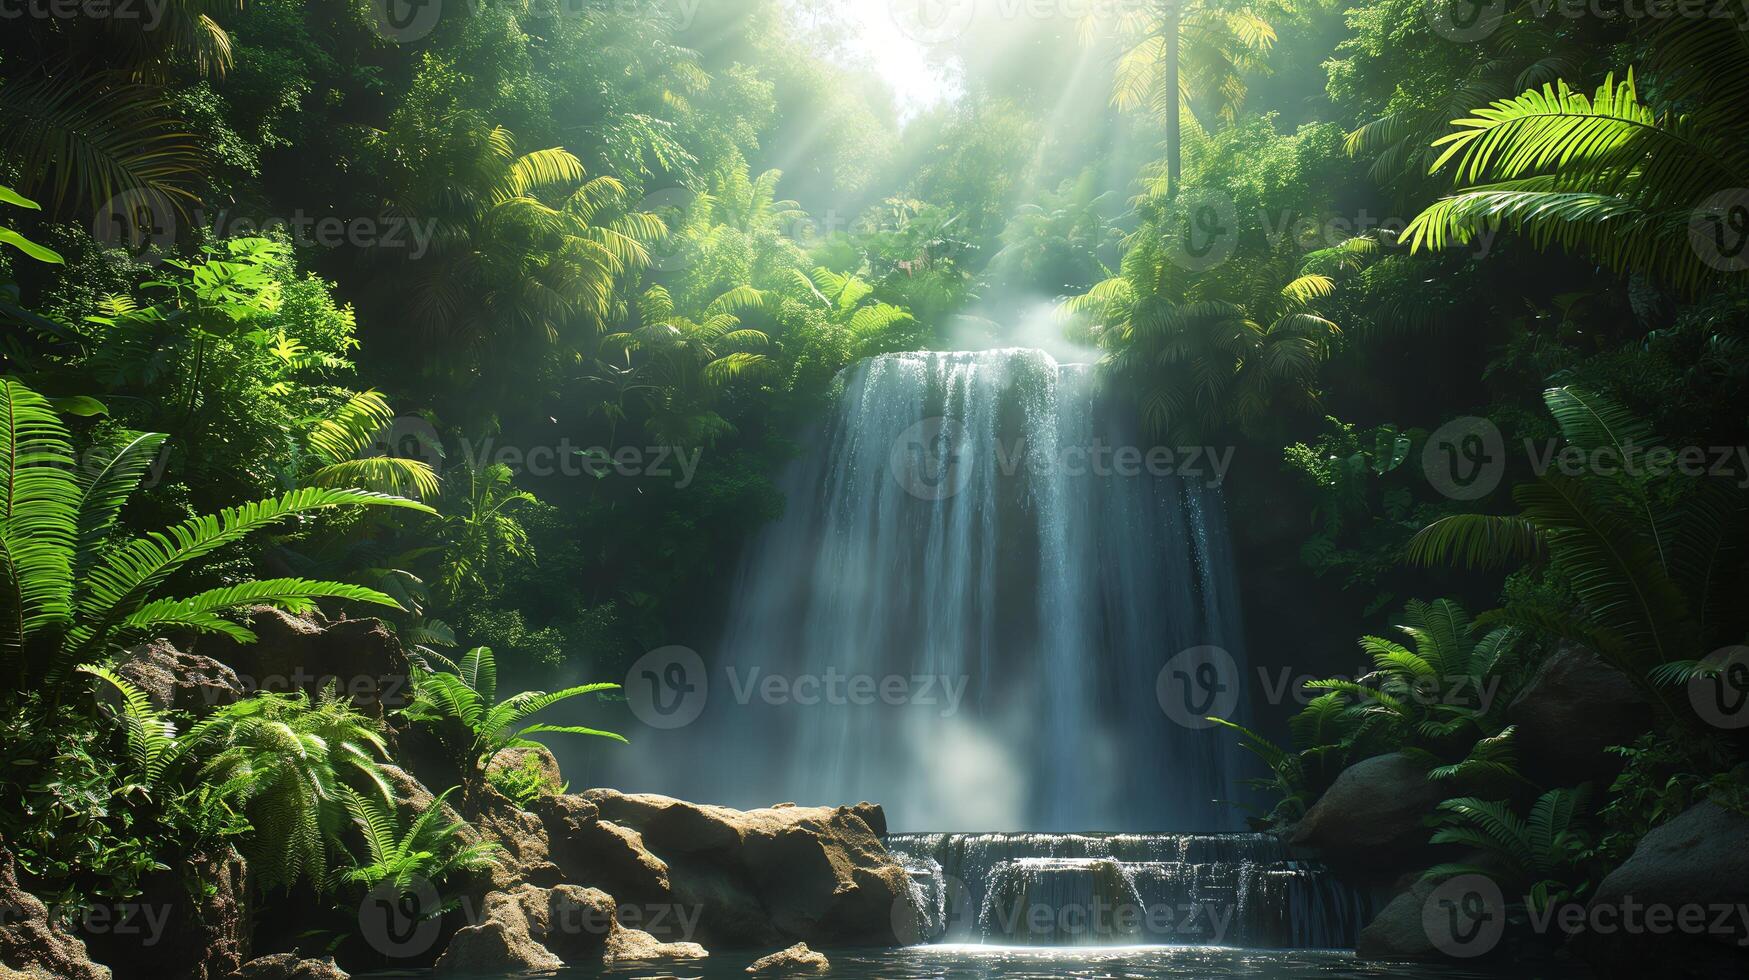 A waterfall surrounded by a dense jungle with lush greenery and rocks photo